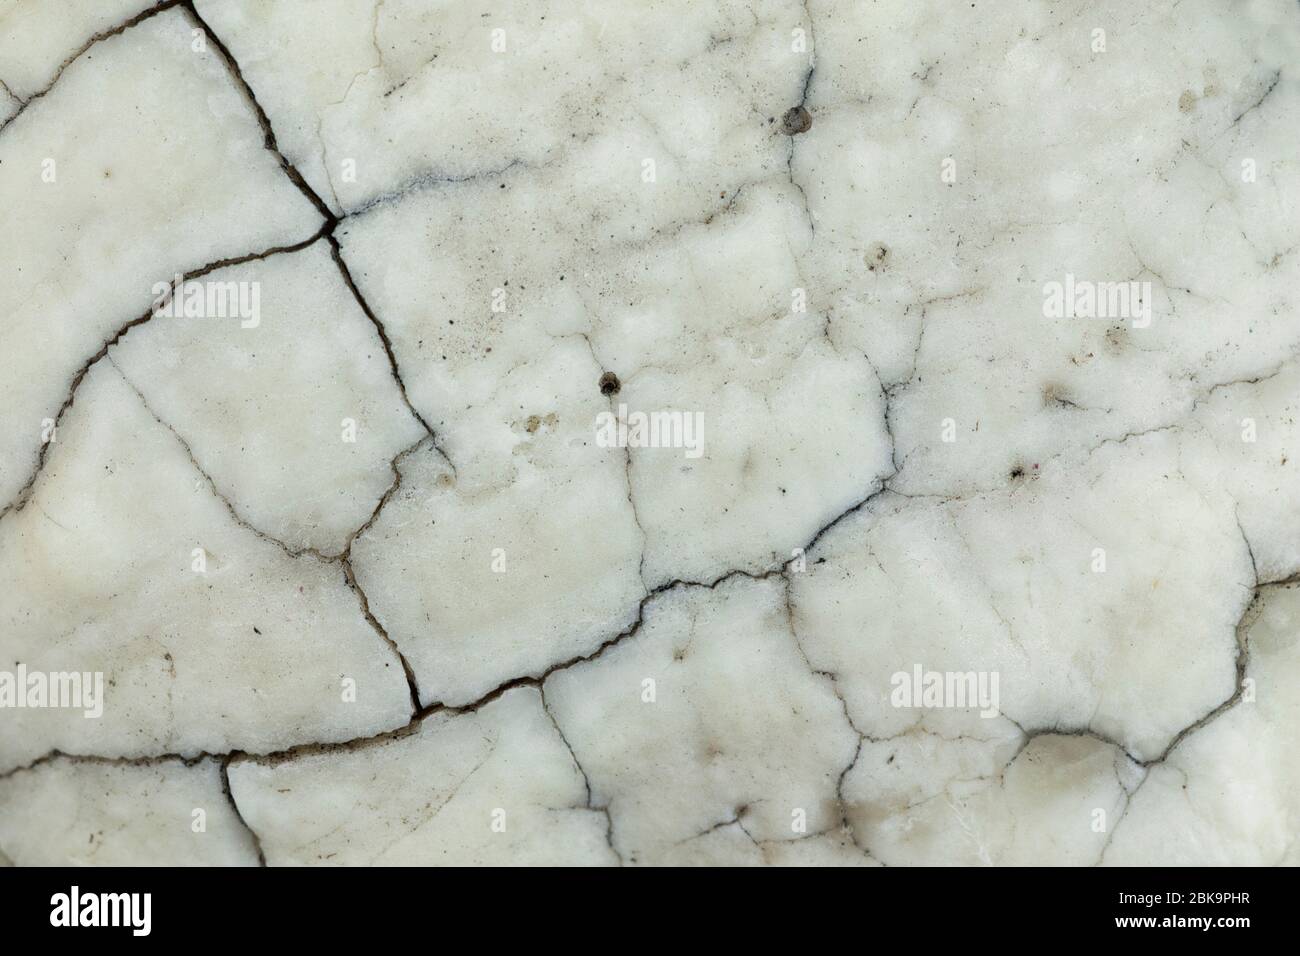 cracks on old horse tooth, textural macro image Stock Photo